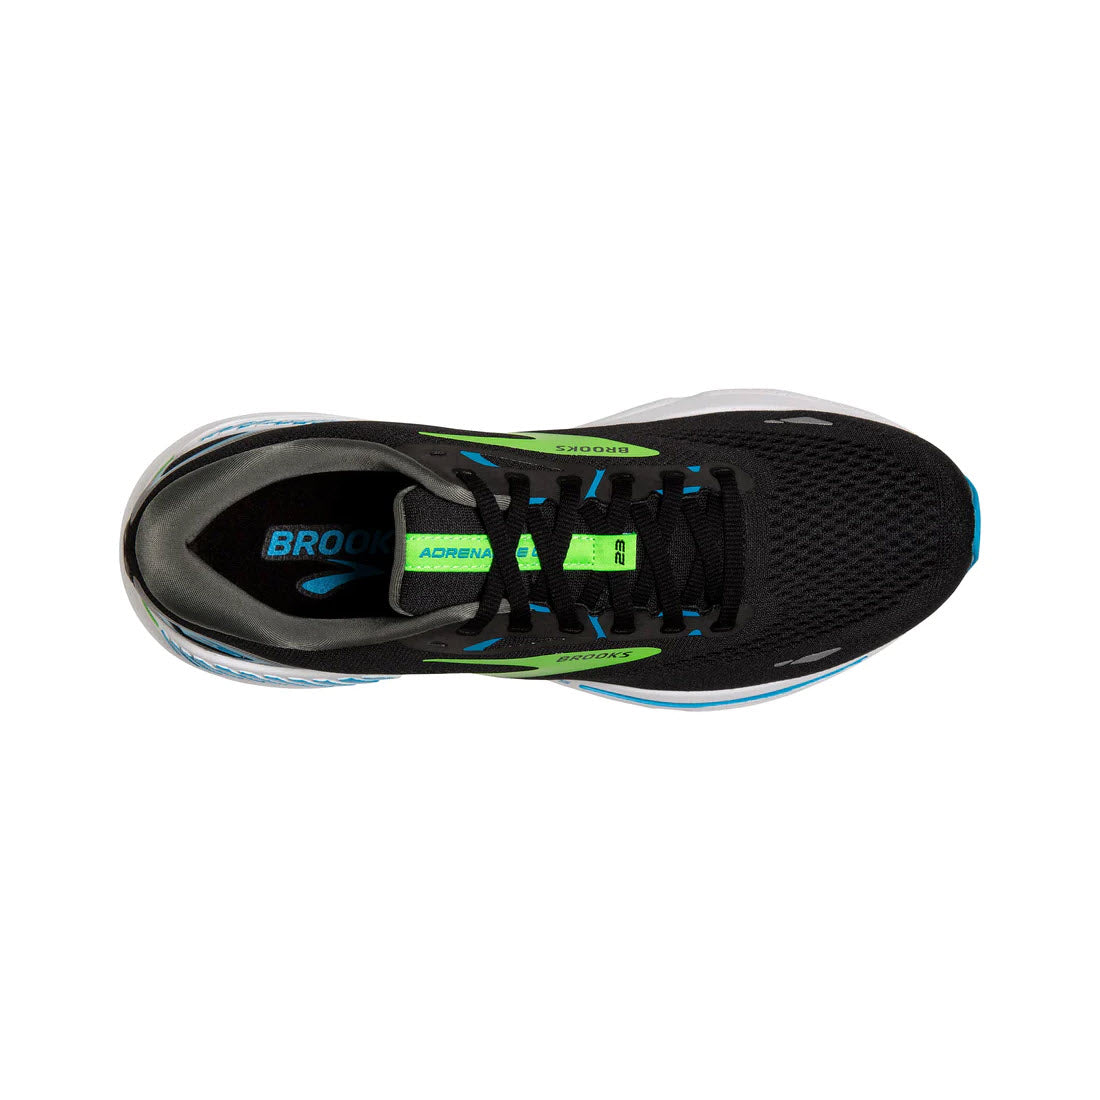 Top view of a single black Brooks Adrenaline GTS 23 stability running shoe with blue and neon green accents.